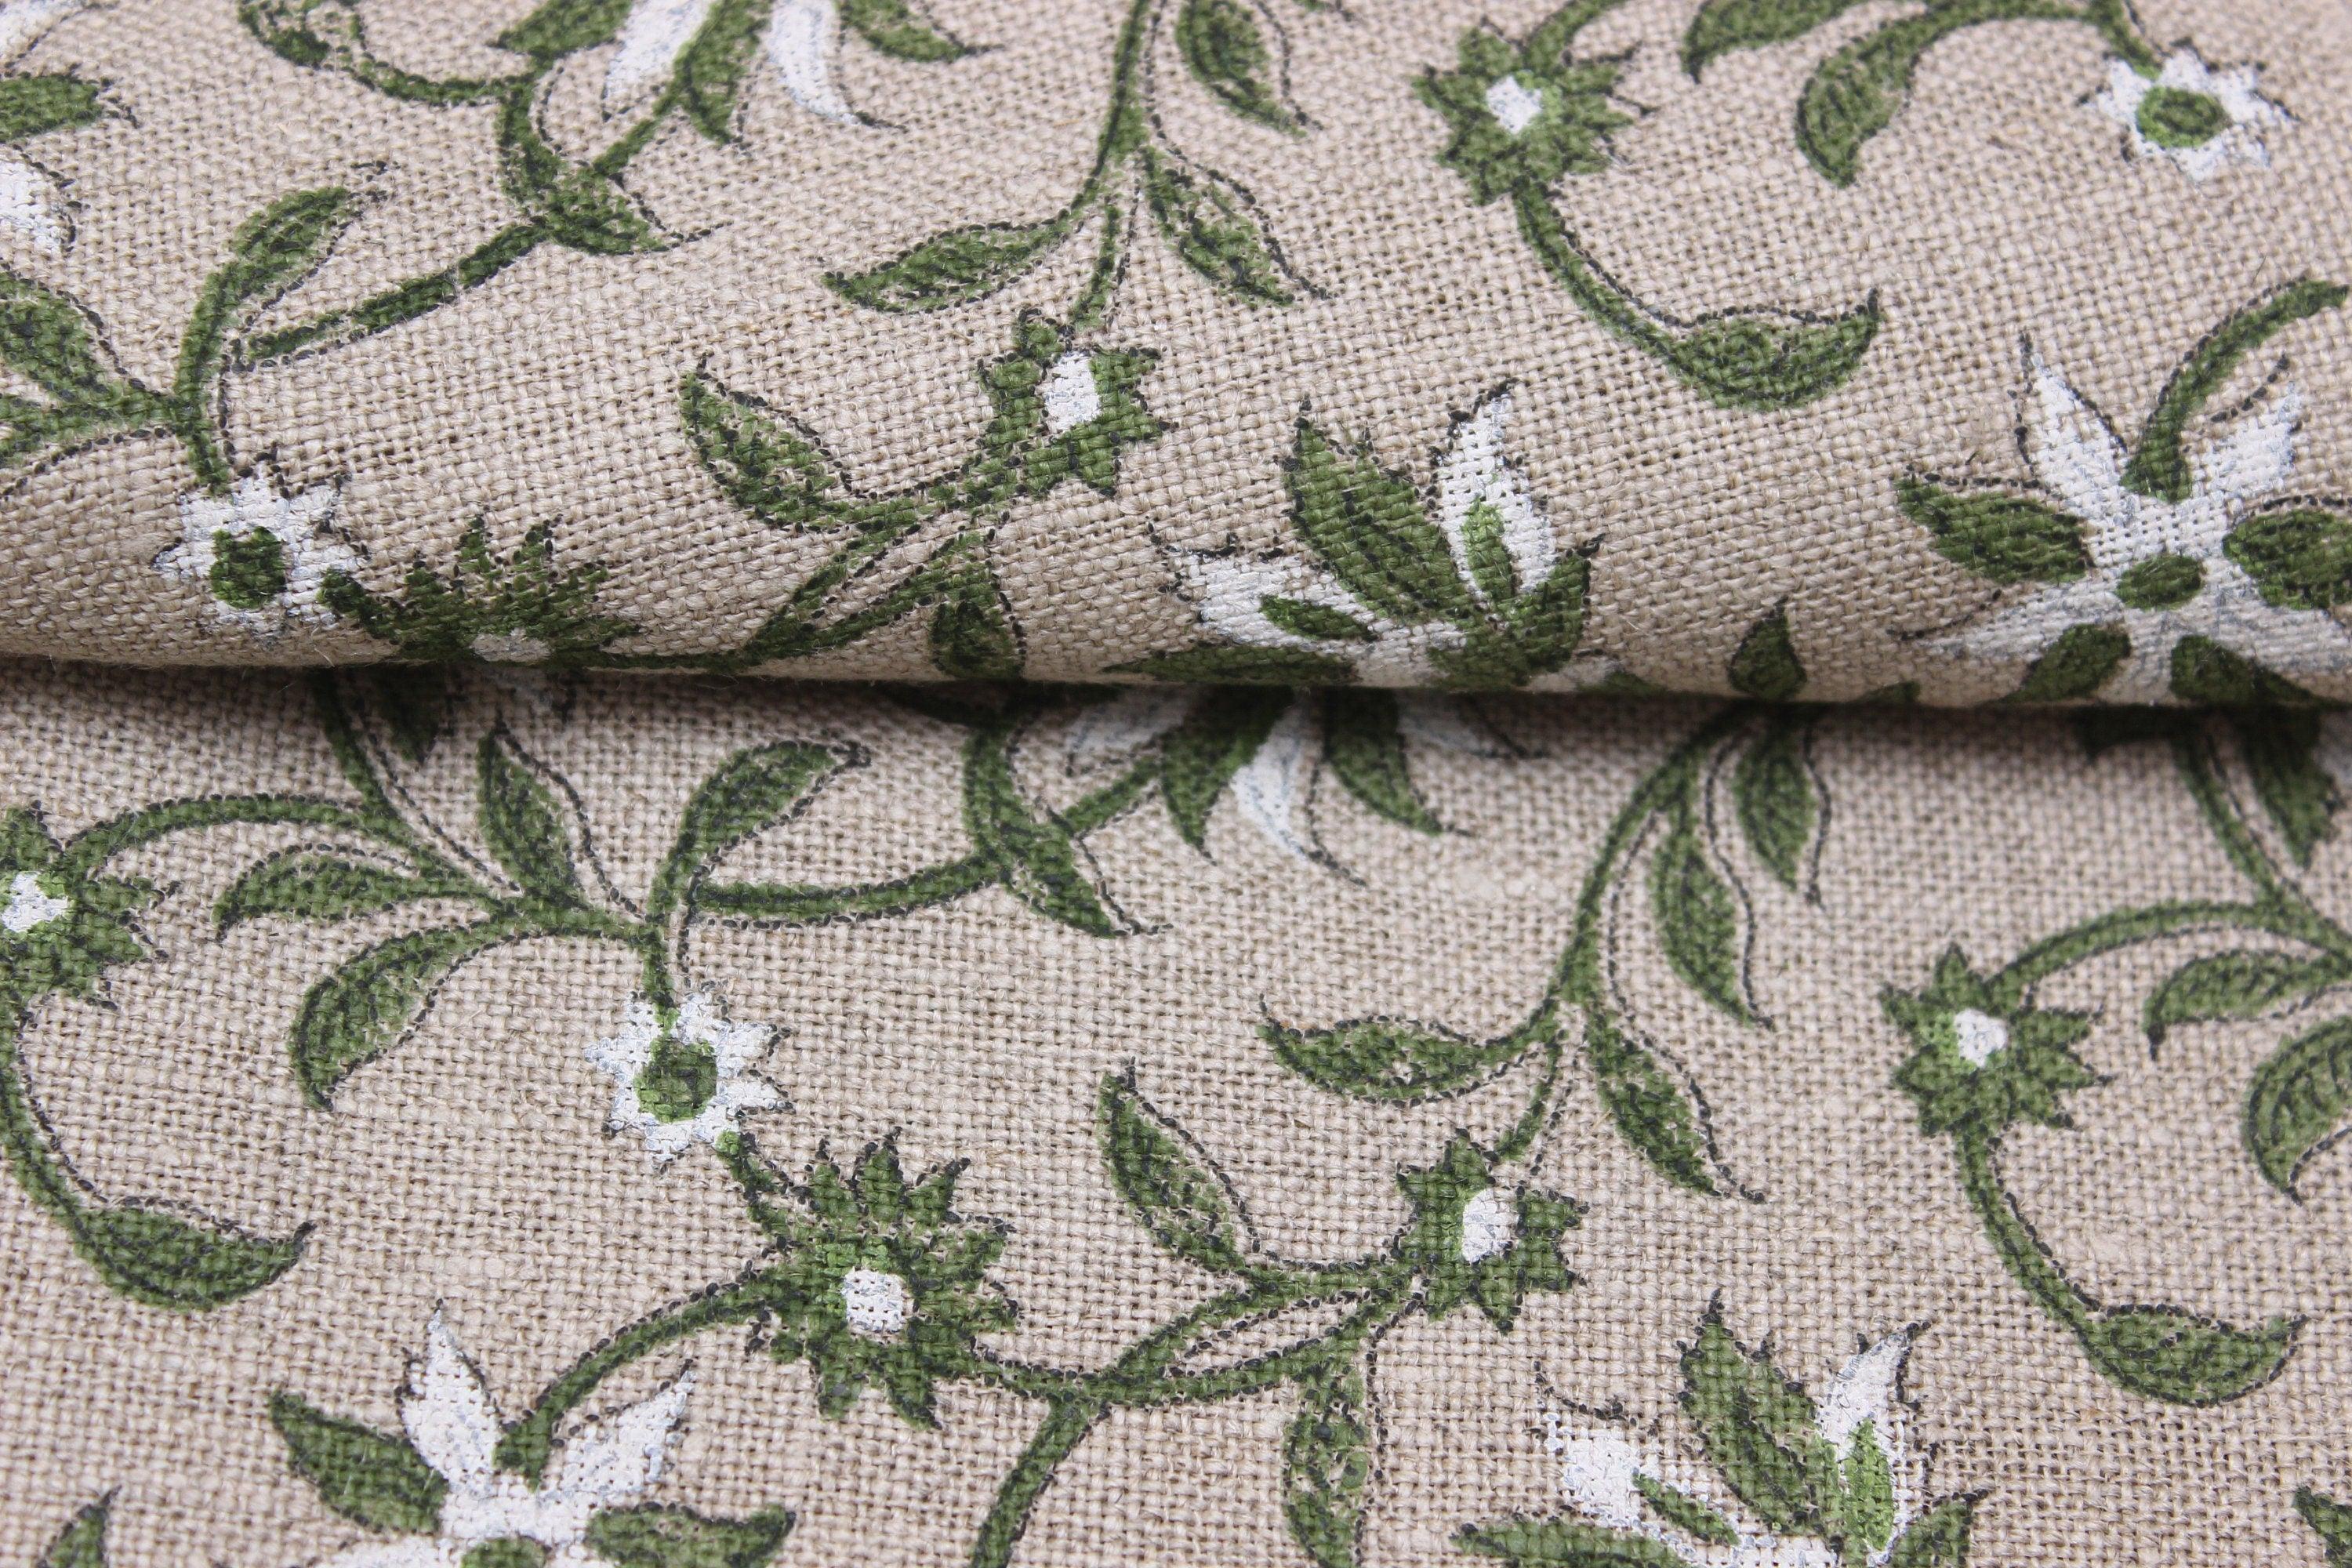 Aradhana   Thick Linen Fabric  Most Popular Block Print Fabric In Summers  Best For Upholstery, Cushion Cover, Sofa/Chair Cover